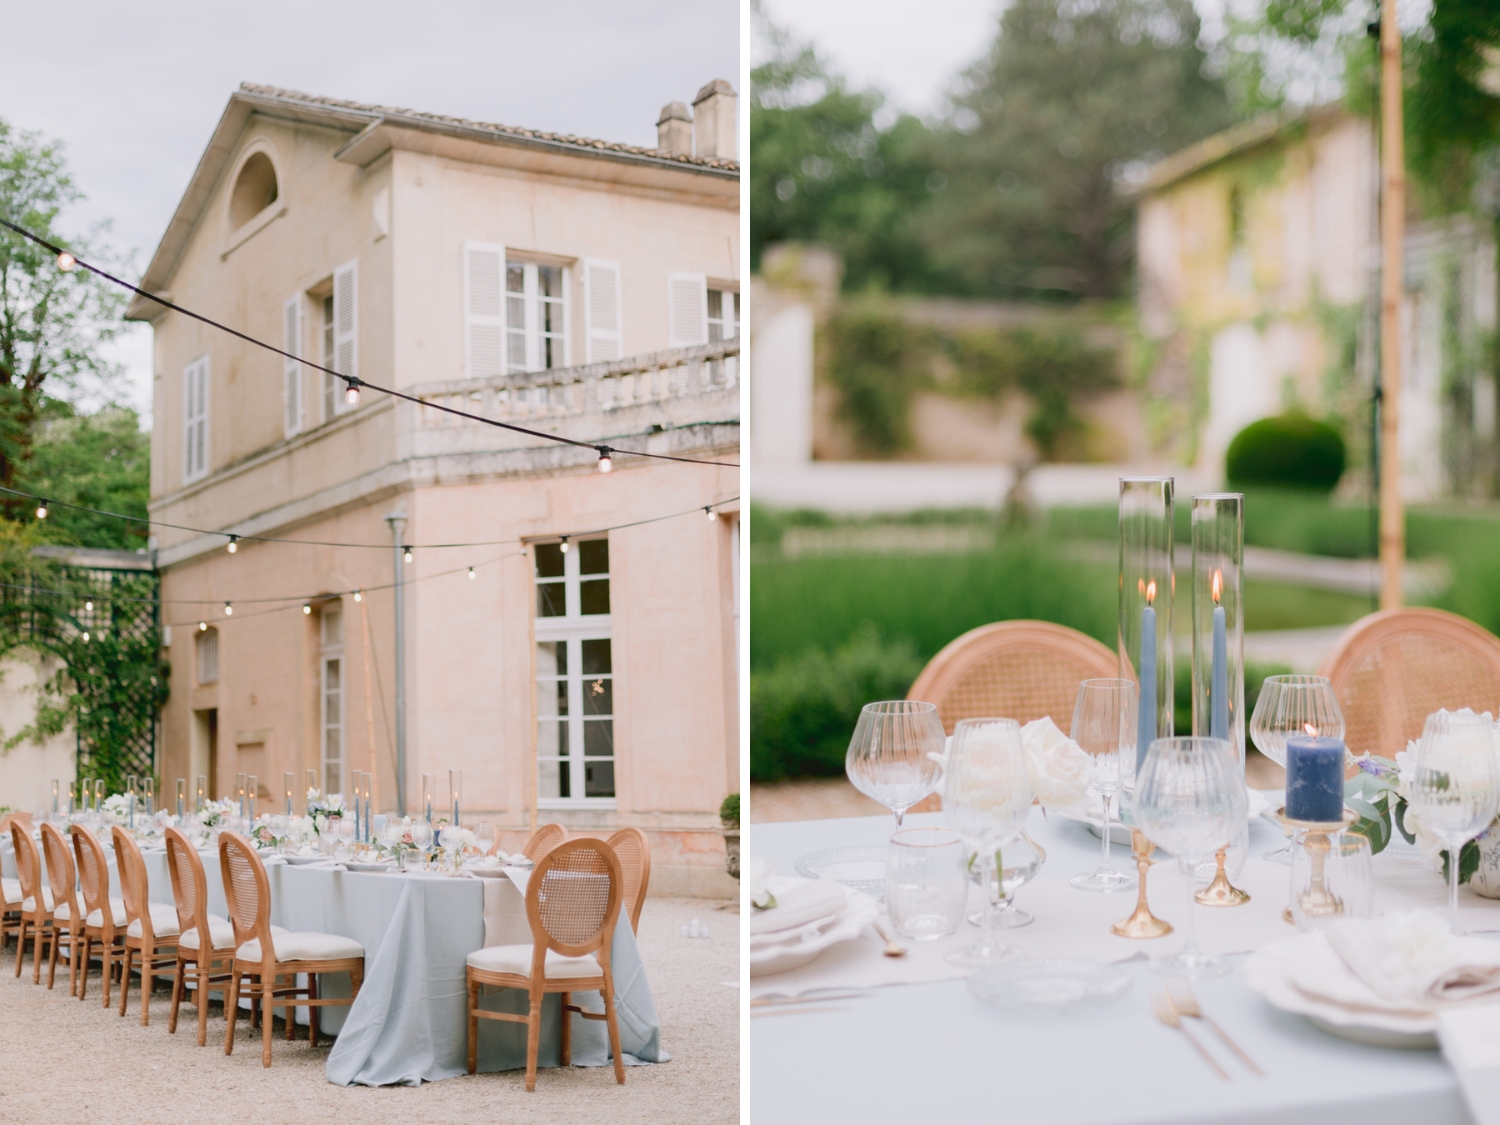 Decoration at a Spring Wedding at Chateau Martinay in Provence, France